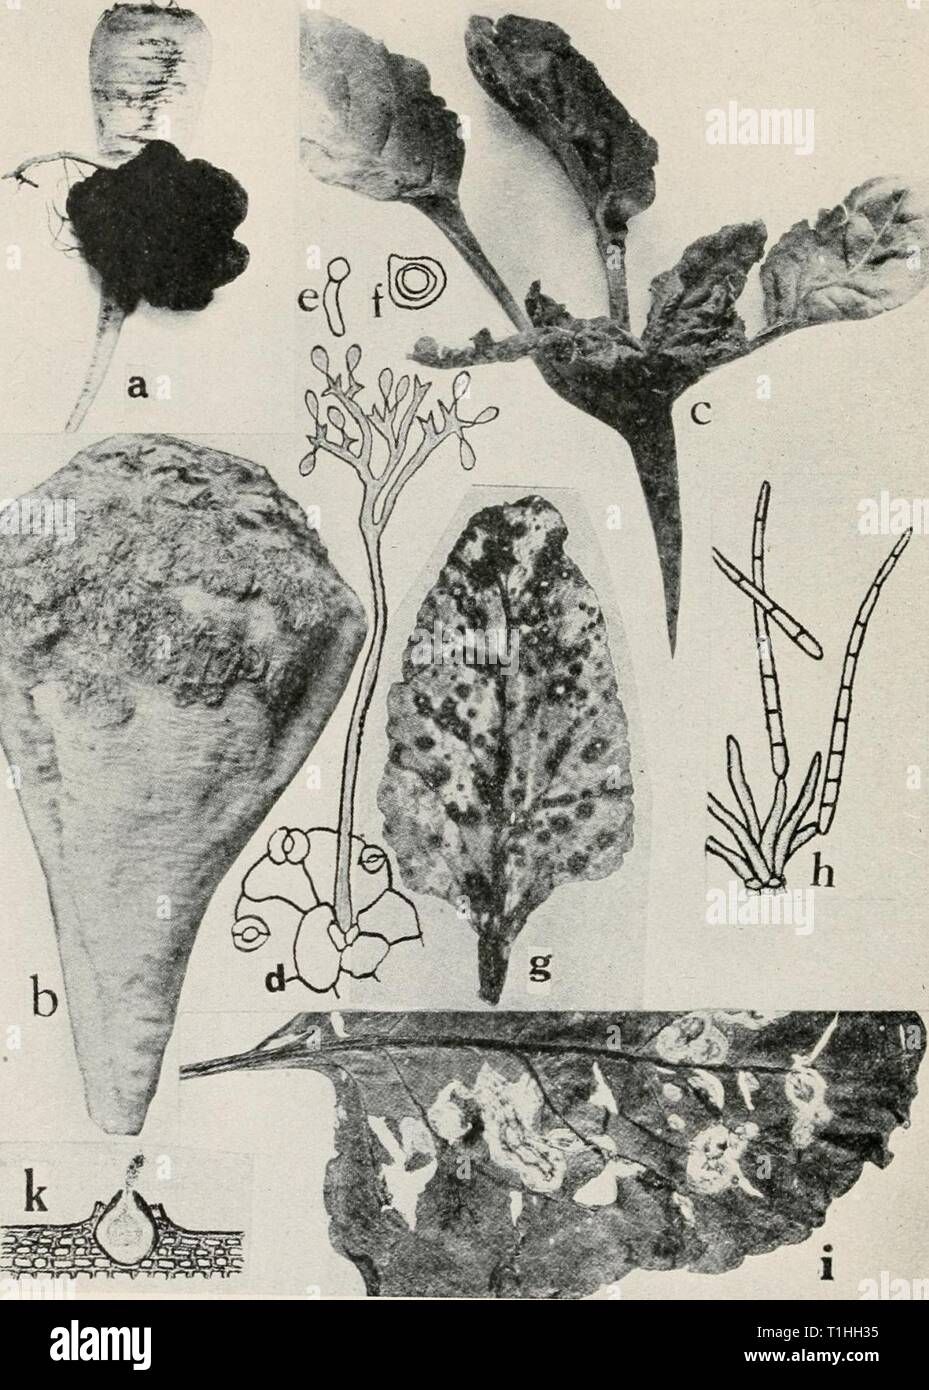 Diseases of truck crops and Diseases of truck crops and their control  diseasesoftruckc00taubuoft Year: [1918]  Fig. 20. Beet Diseases. a. Crown gall, b. scab c. downy mildew, d. Conidiophore of Peroyiospora schachlii arising from a stomate of an infected beet leaf, e. germinating zoospore of P. schach- •/• °°?P.O''e 'f - schachlii, g. Cercospora leaf spot (after Halsted), h. conidiophore and conidia of Cercospora belicola (after Duggar), i. Phoma leaf spot (after Pool and McKay), k. pycnidium of Phoma belce (after T. Johnson) {d.-f. after PriUieux). Stock Photo